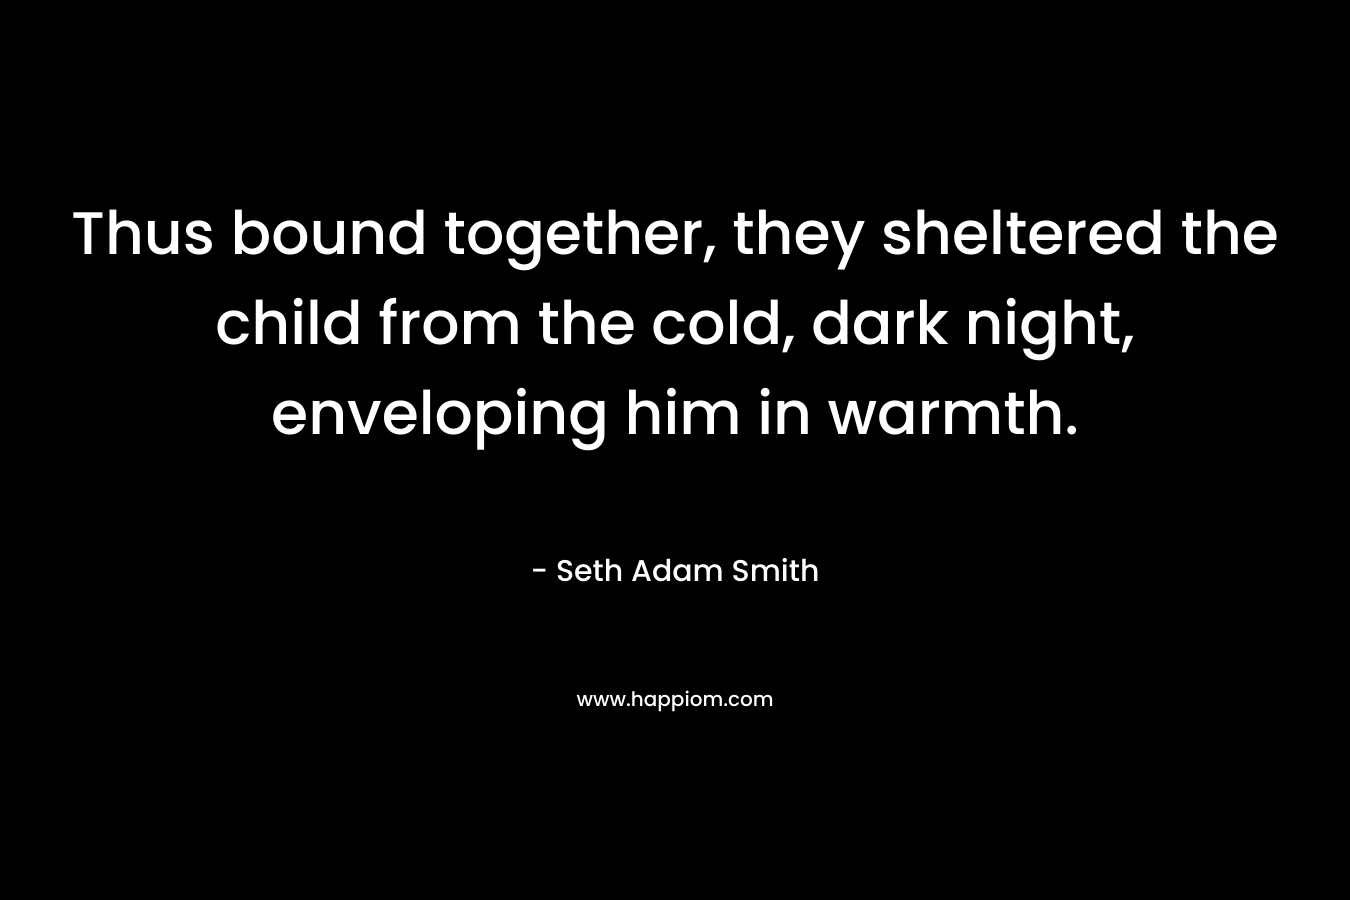 Thus bound together, they sheltered the child from the cold, dark night, enveloping him in warmth.